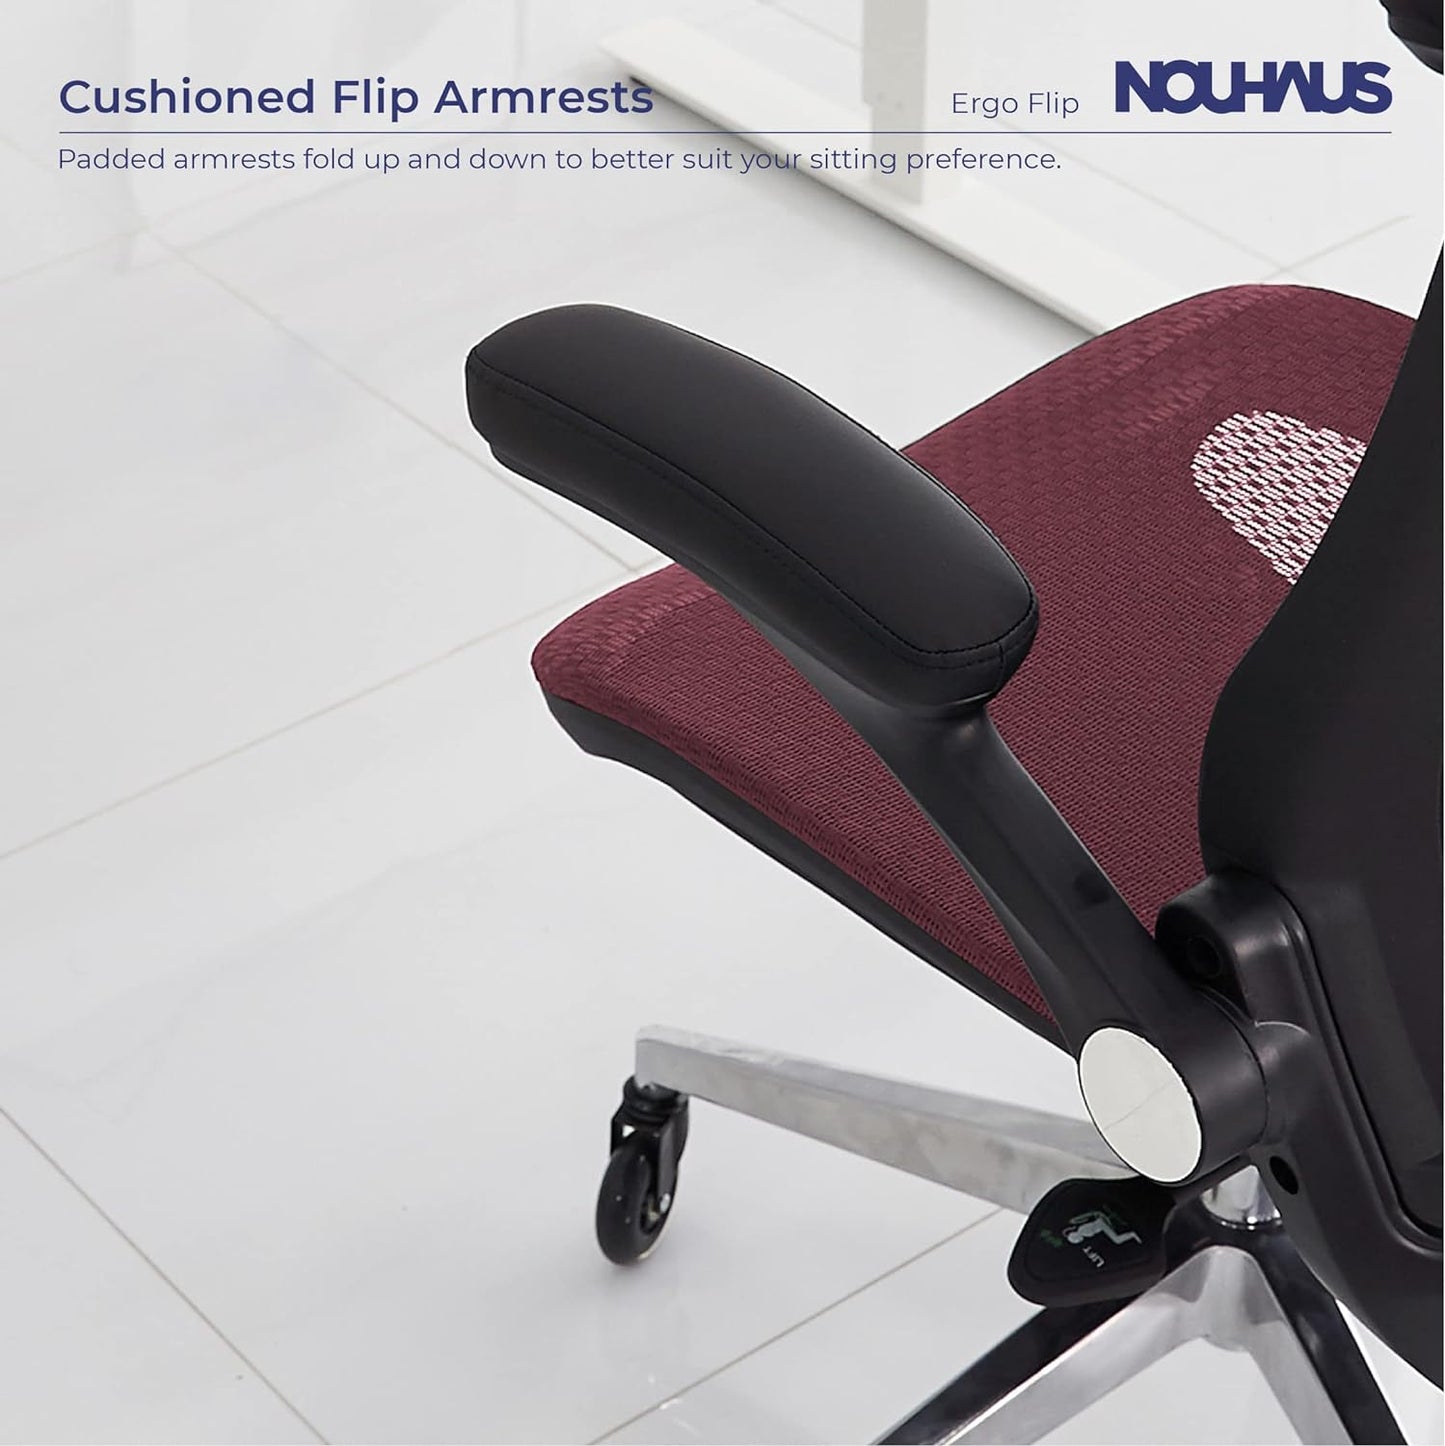 ErgoFlip Mesh Computer Chair - Burgundy Rolling Desk Chair with Retractable Armrest and Blade Wheels Ergonomic Office Chair, Desk Chairs, Executive Swivel Chair/High Spec Base